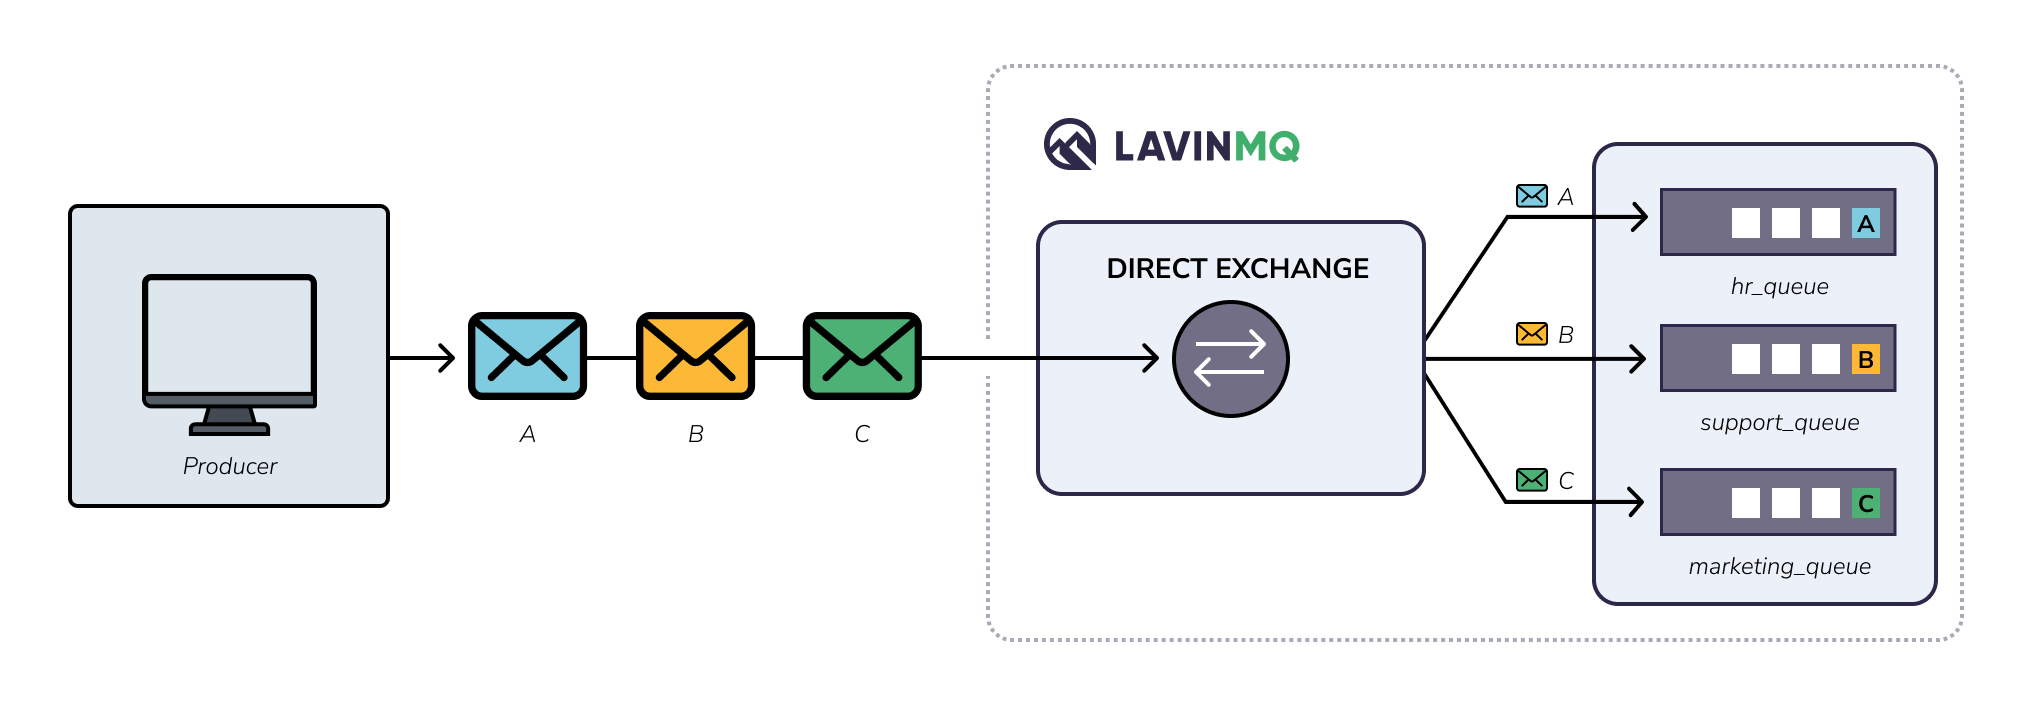 Message flow in direct exchanges